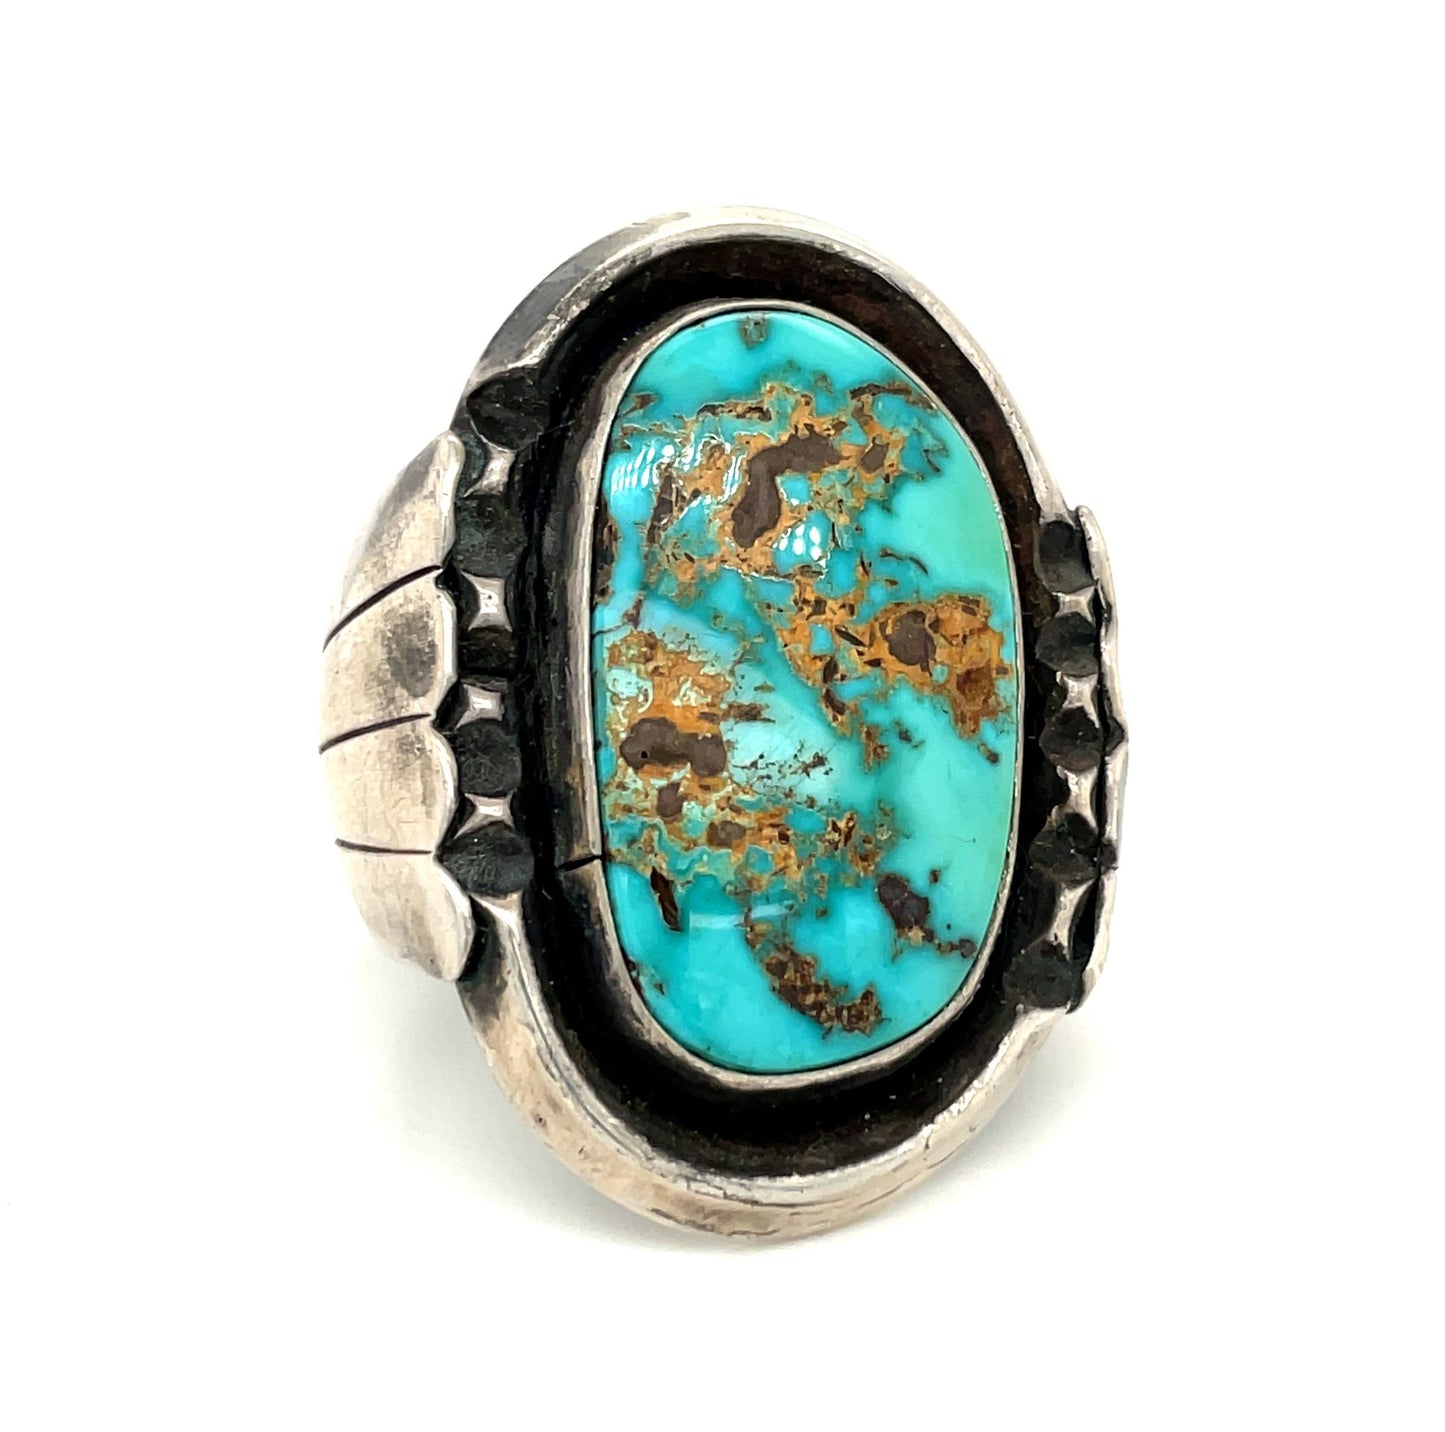 Vintage Southwestern Sterling Silver and Turquoise Ring Size 12